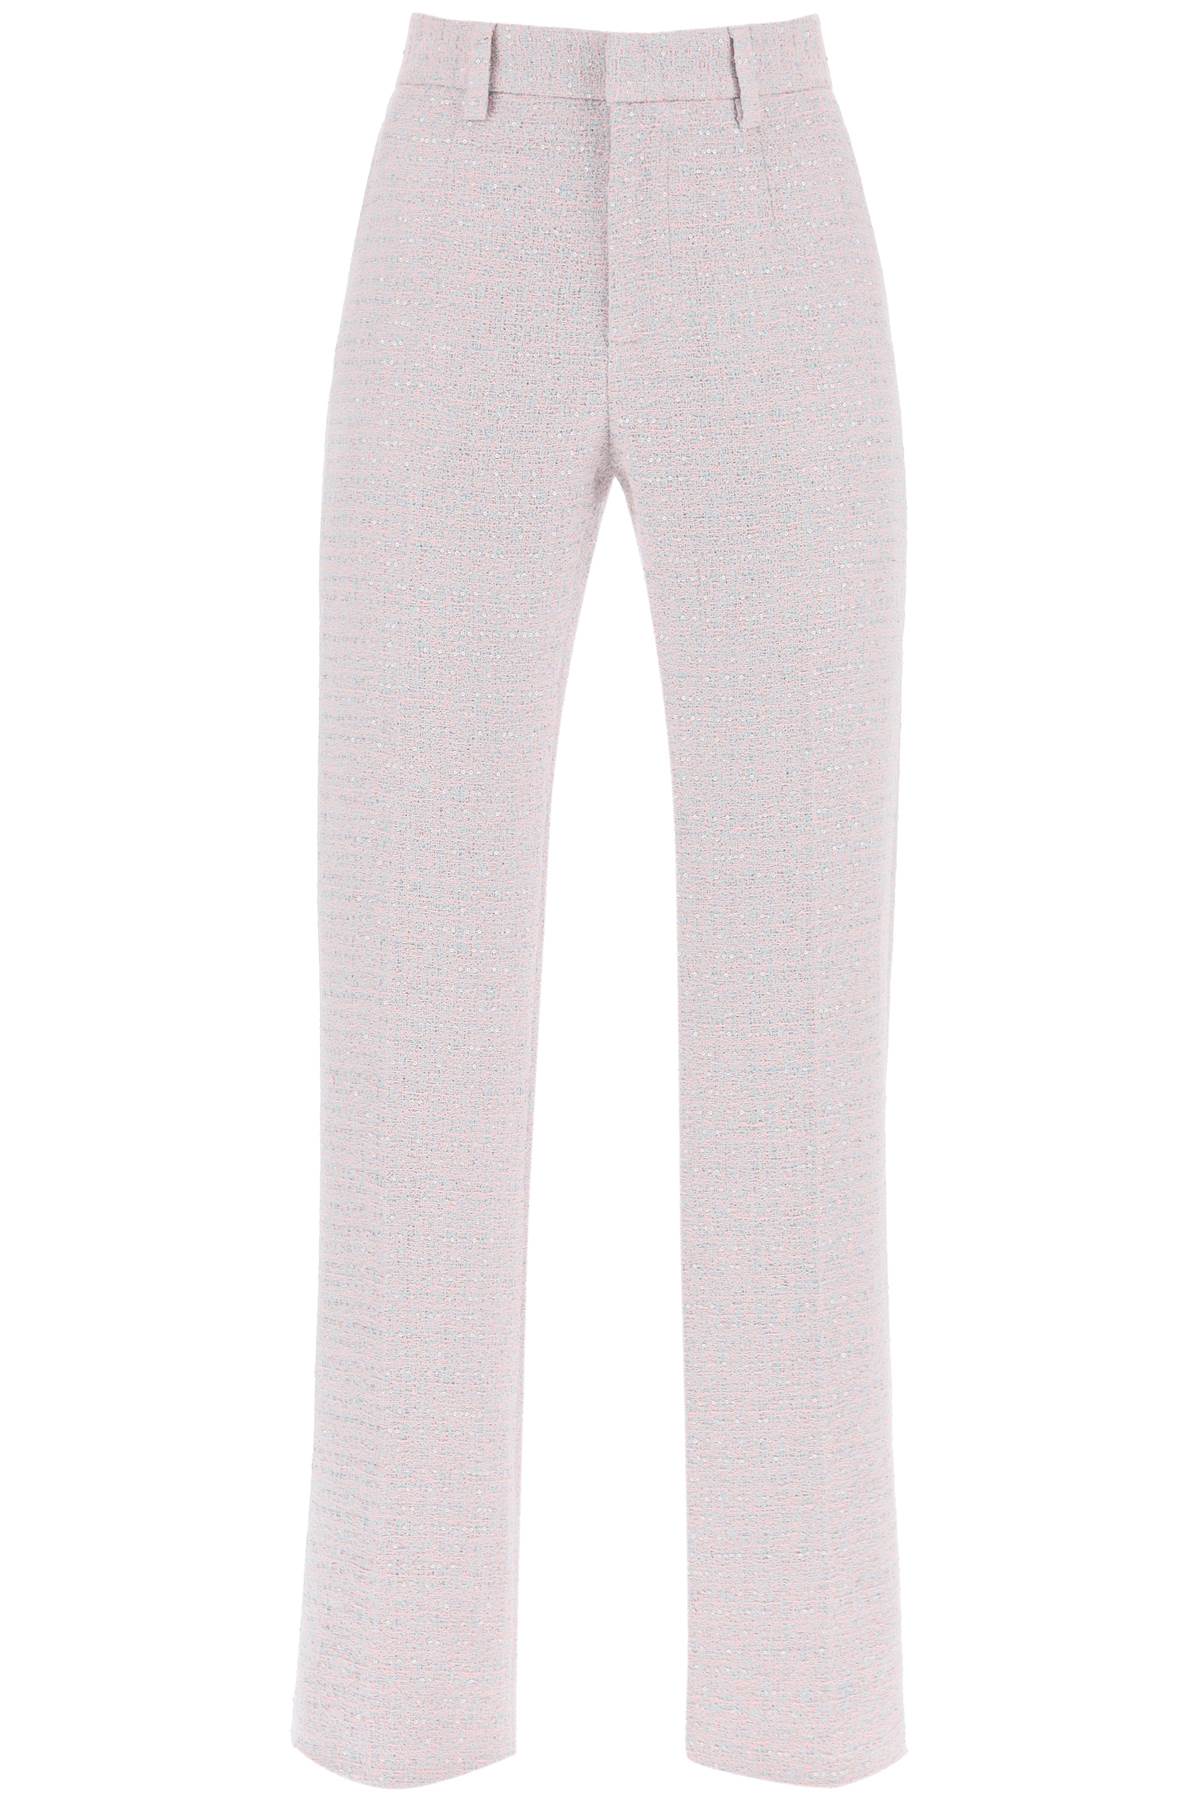 Alessandra Rich Pants In Tweed Boucle' In Pink,light Blue